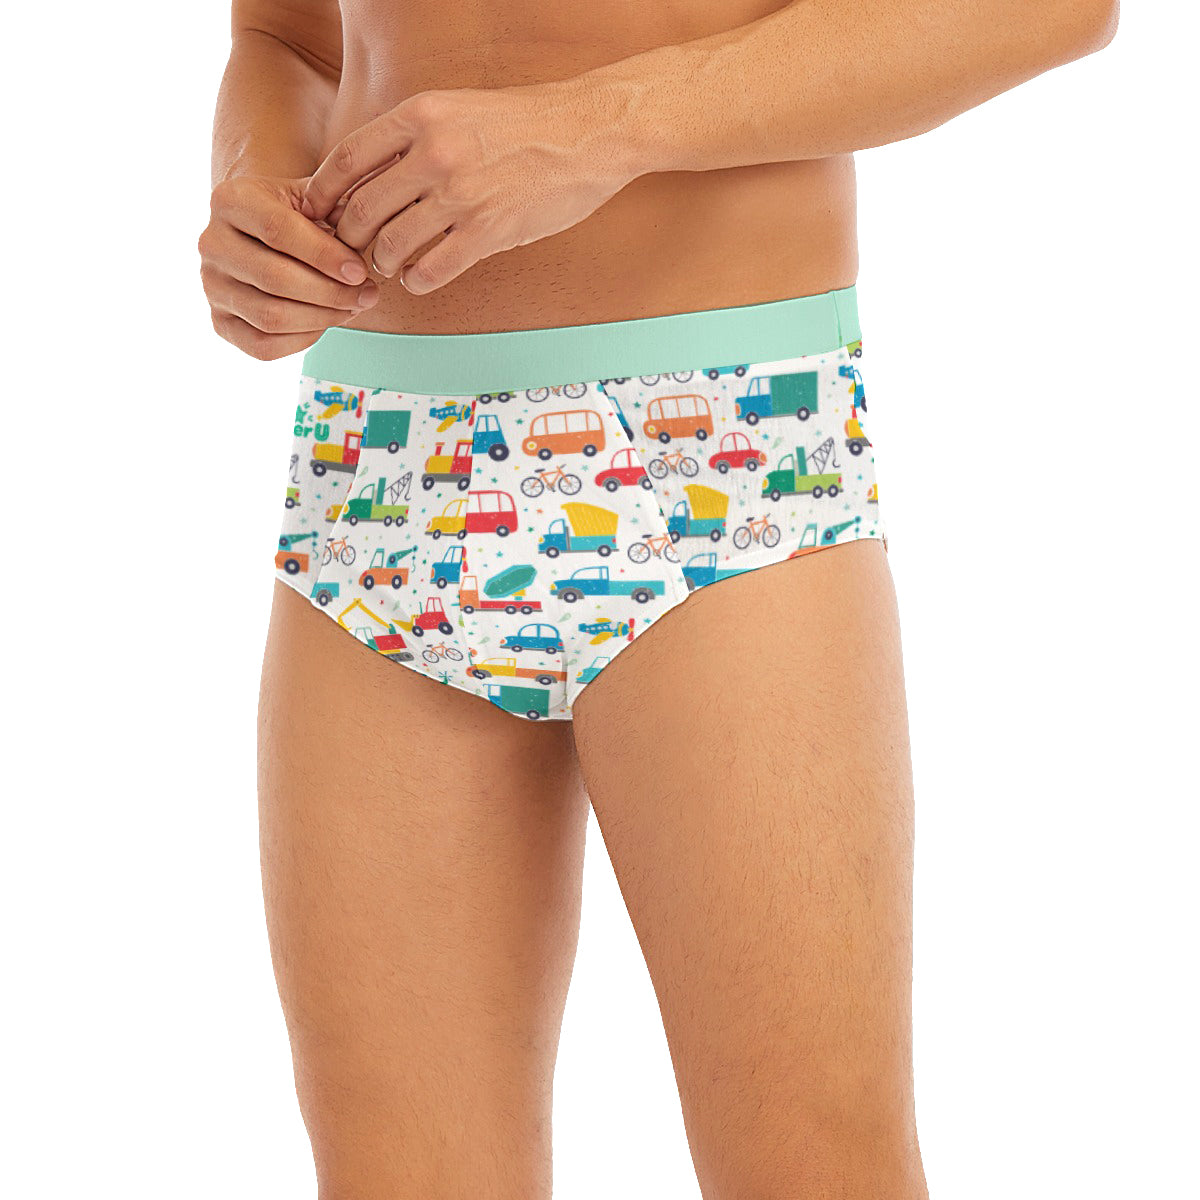 Adult Baby Boy Briefs - Vehicle Collection Sets (4 Briefs)